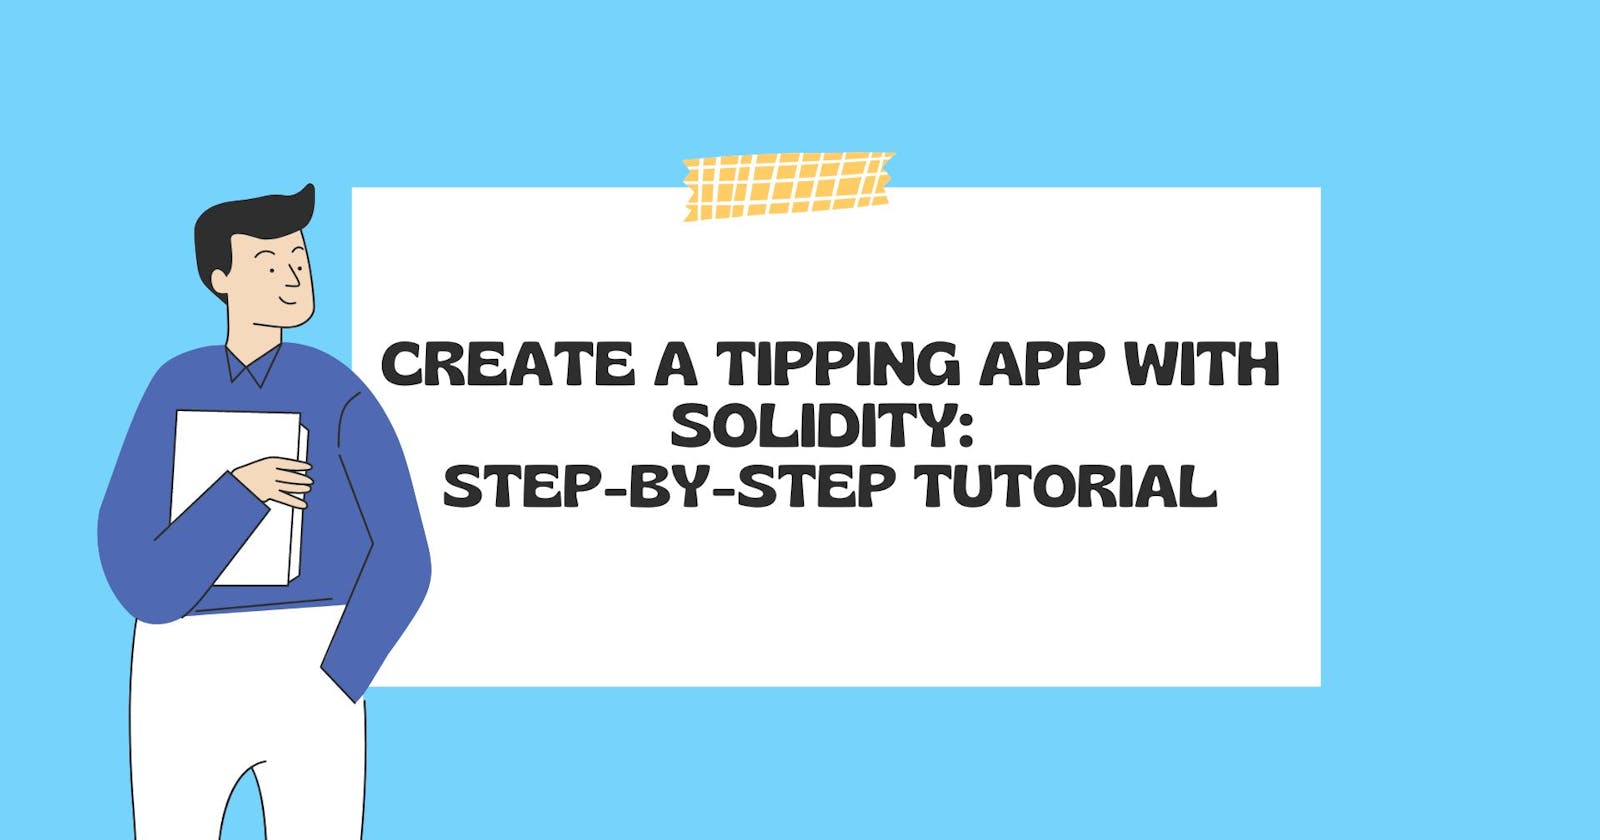 Create a tipping app with Solidity: Step-by-step Tutorial